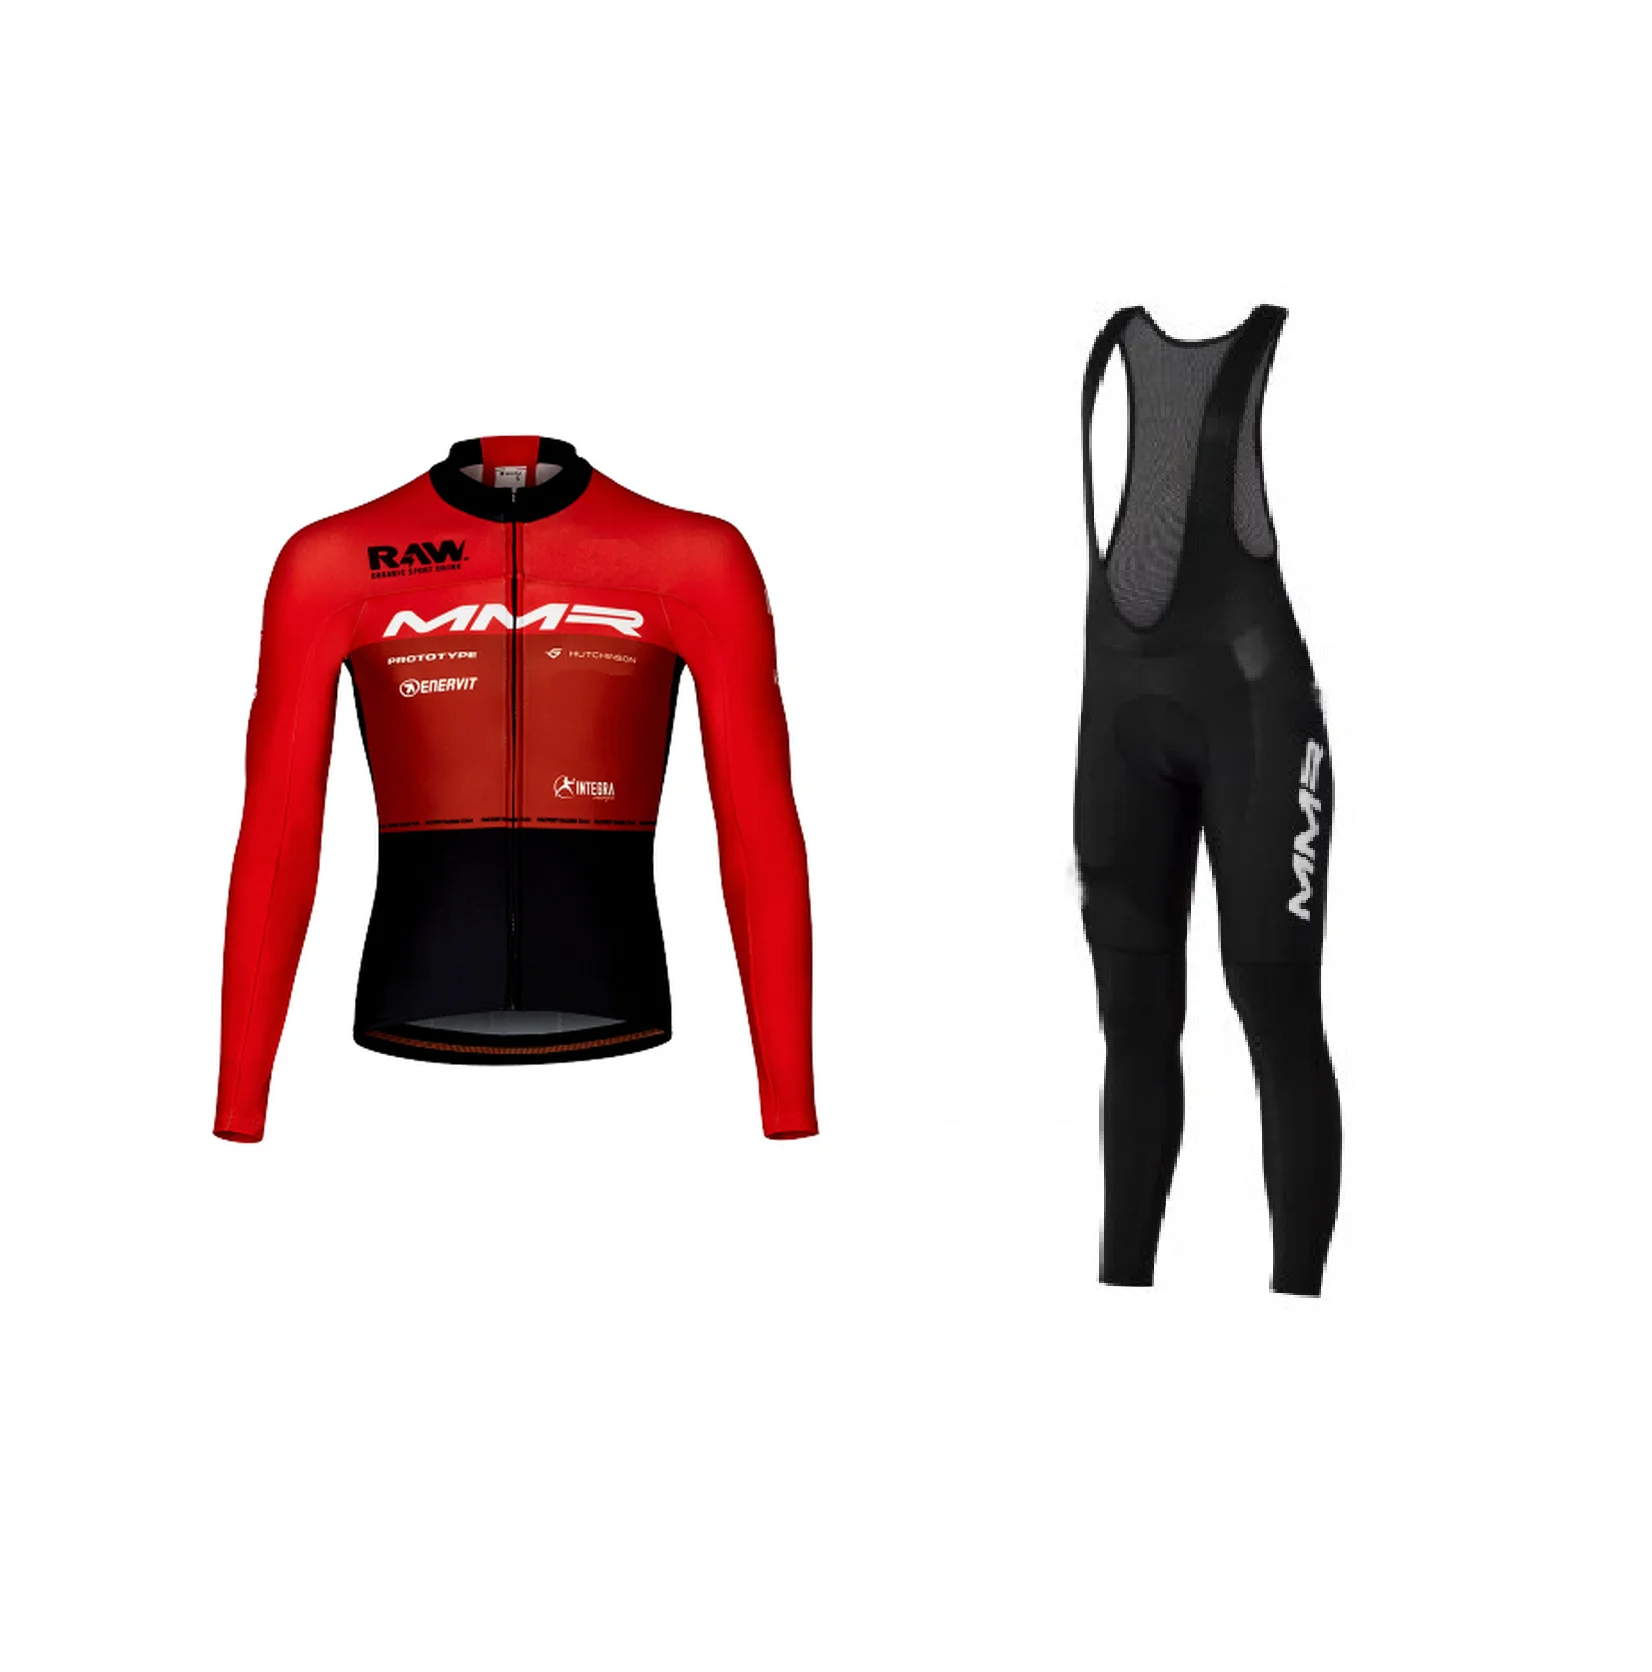 

SPRING SUMMER 2023 MMR FACTORY RACING TEAM Cycling Jersey Long Sleeve Bicycle Clothing With Bib PANTS Ropa Ciclismo